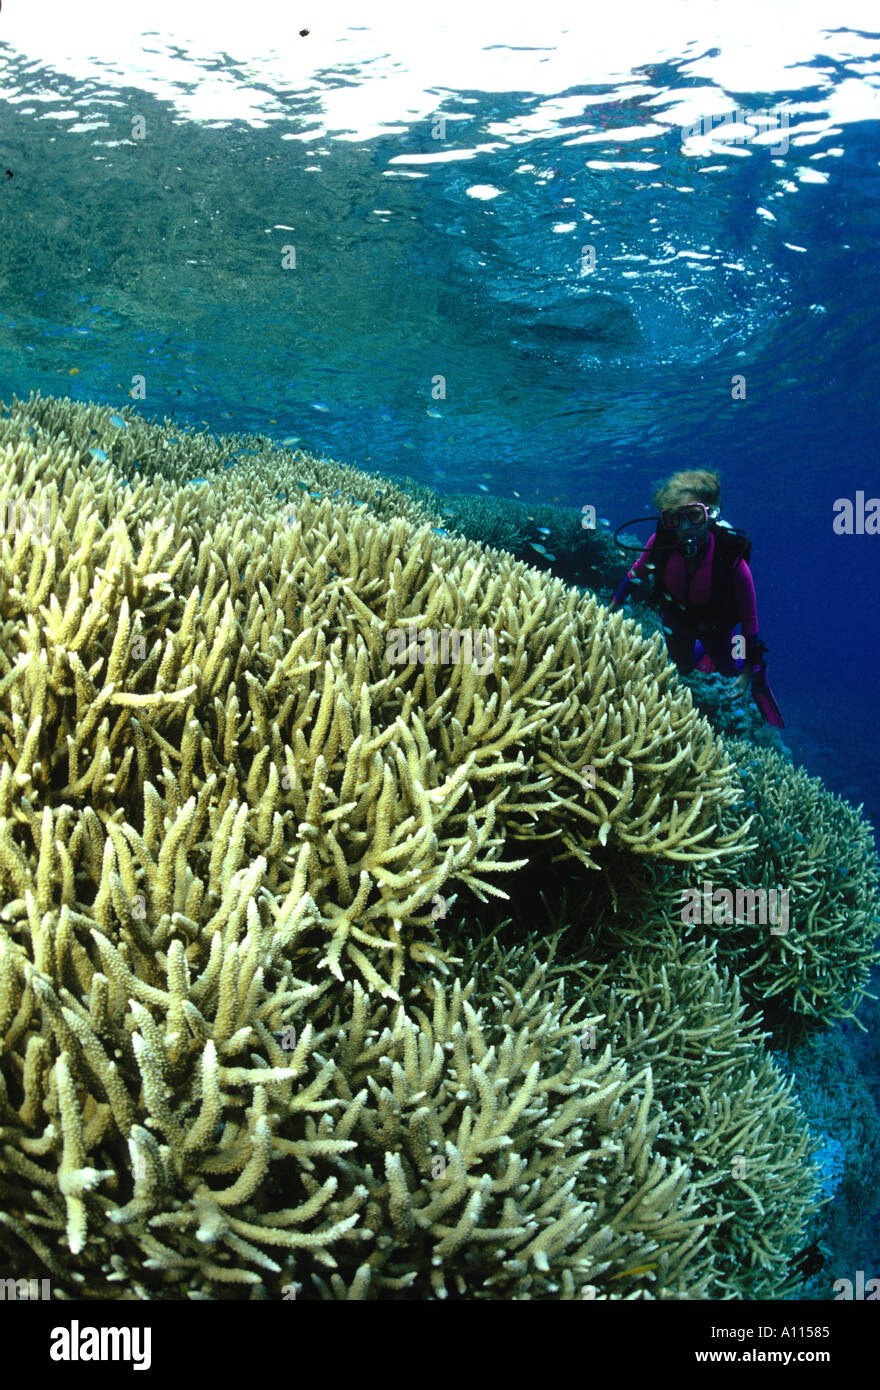 A FEMALE SCUBA DIVER AND A LARGE CLUSTER OF STAGHORN CORALS ON A REEF TOP IN PAPUA NEW GUINEA Stock Photo